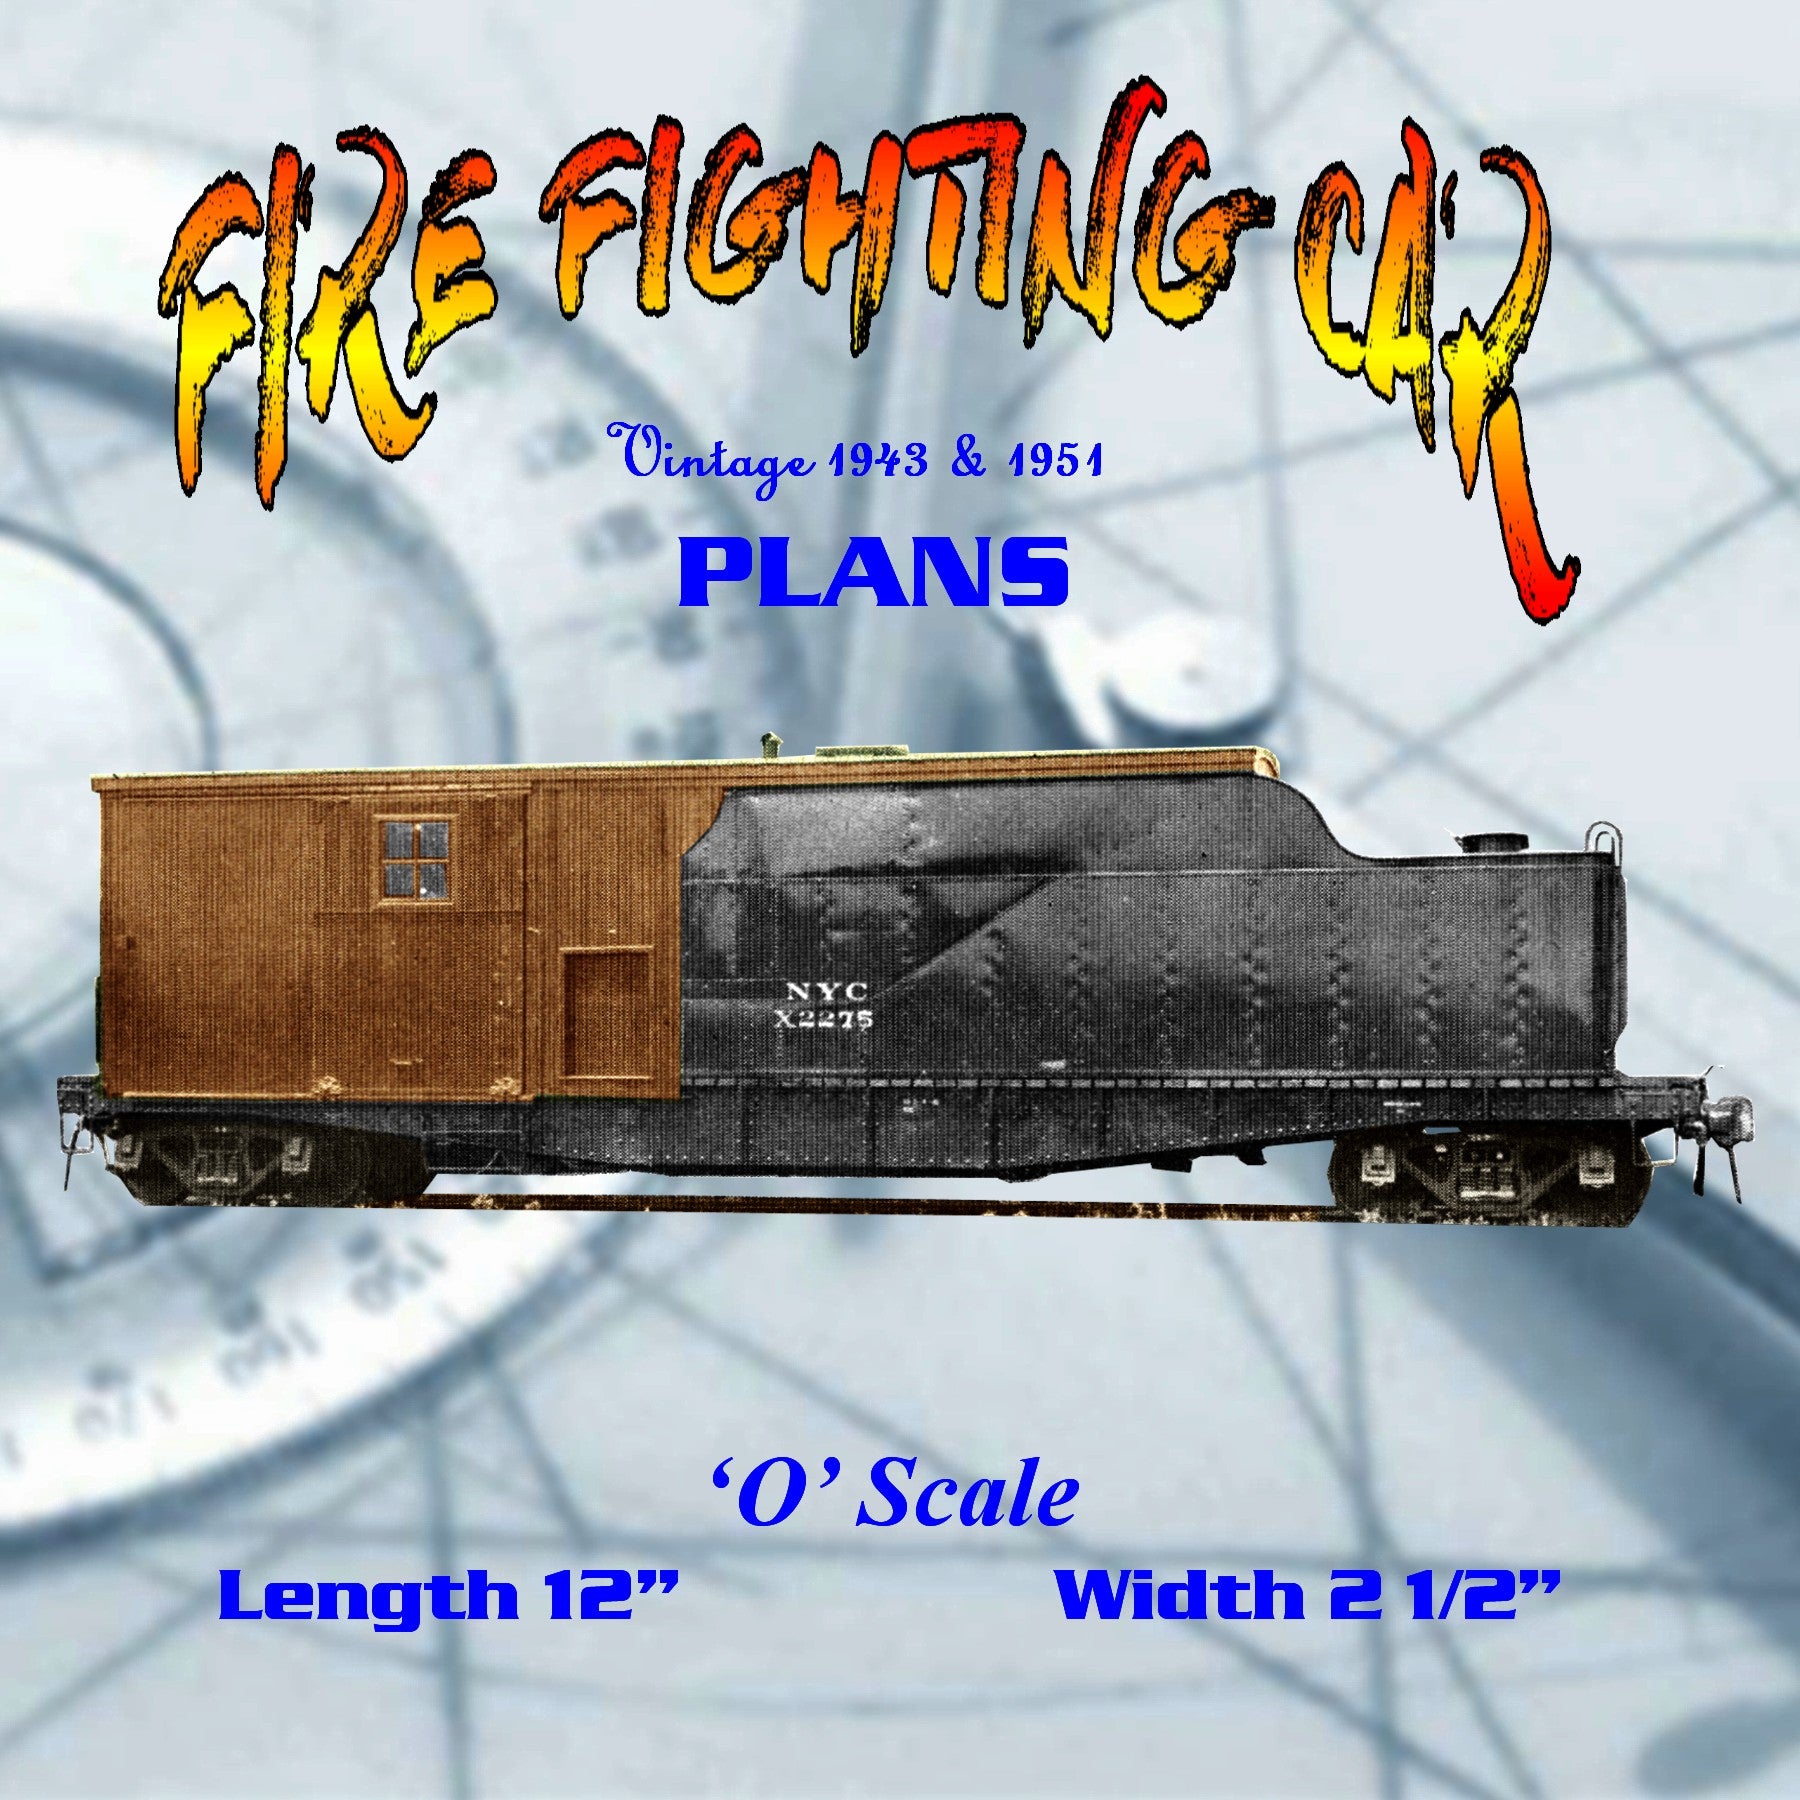 full size printed plan 'o' gauge fire fighting car new york central system